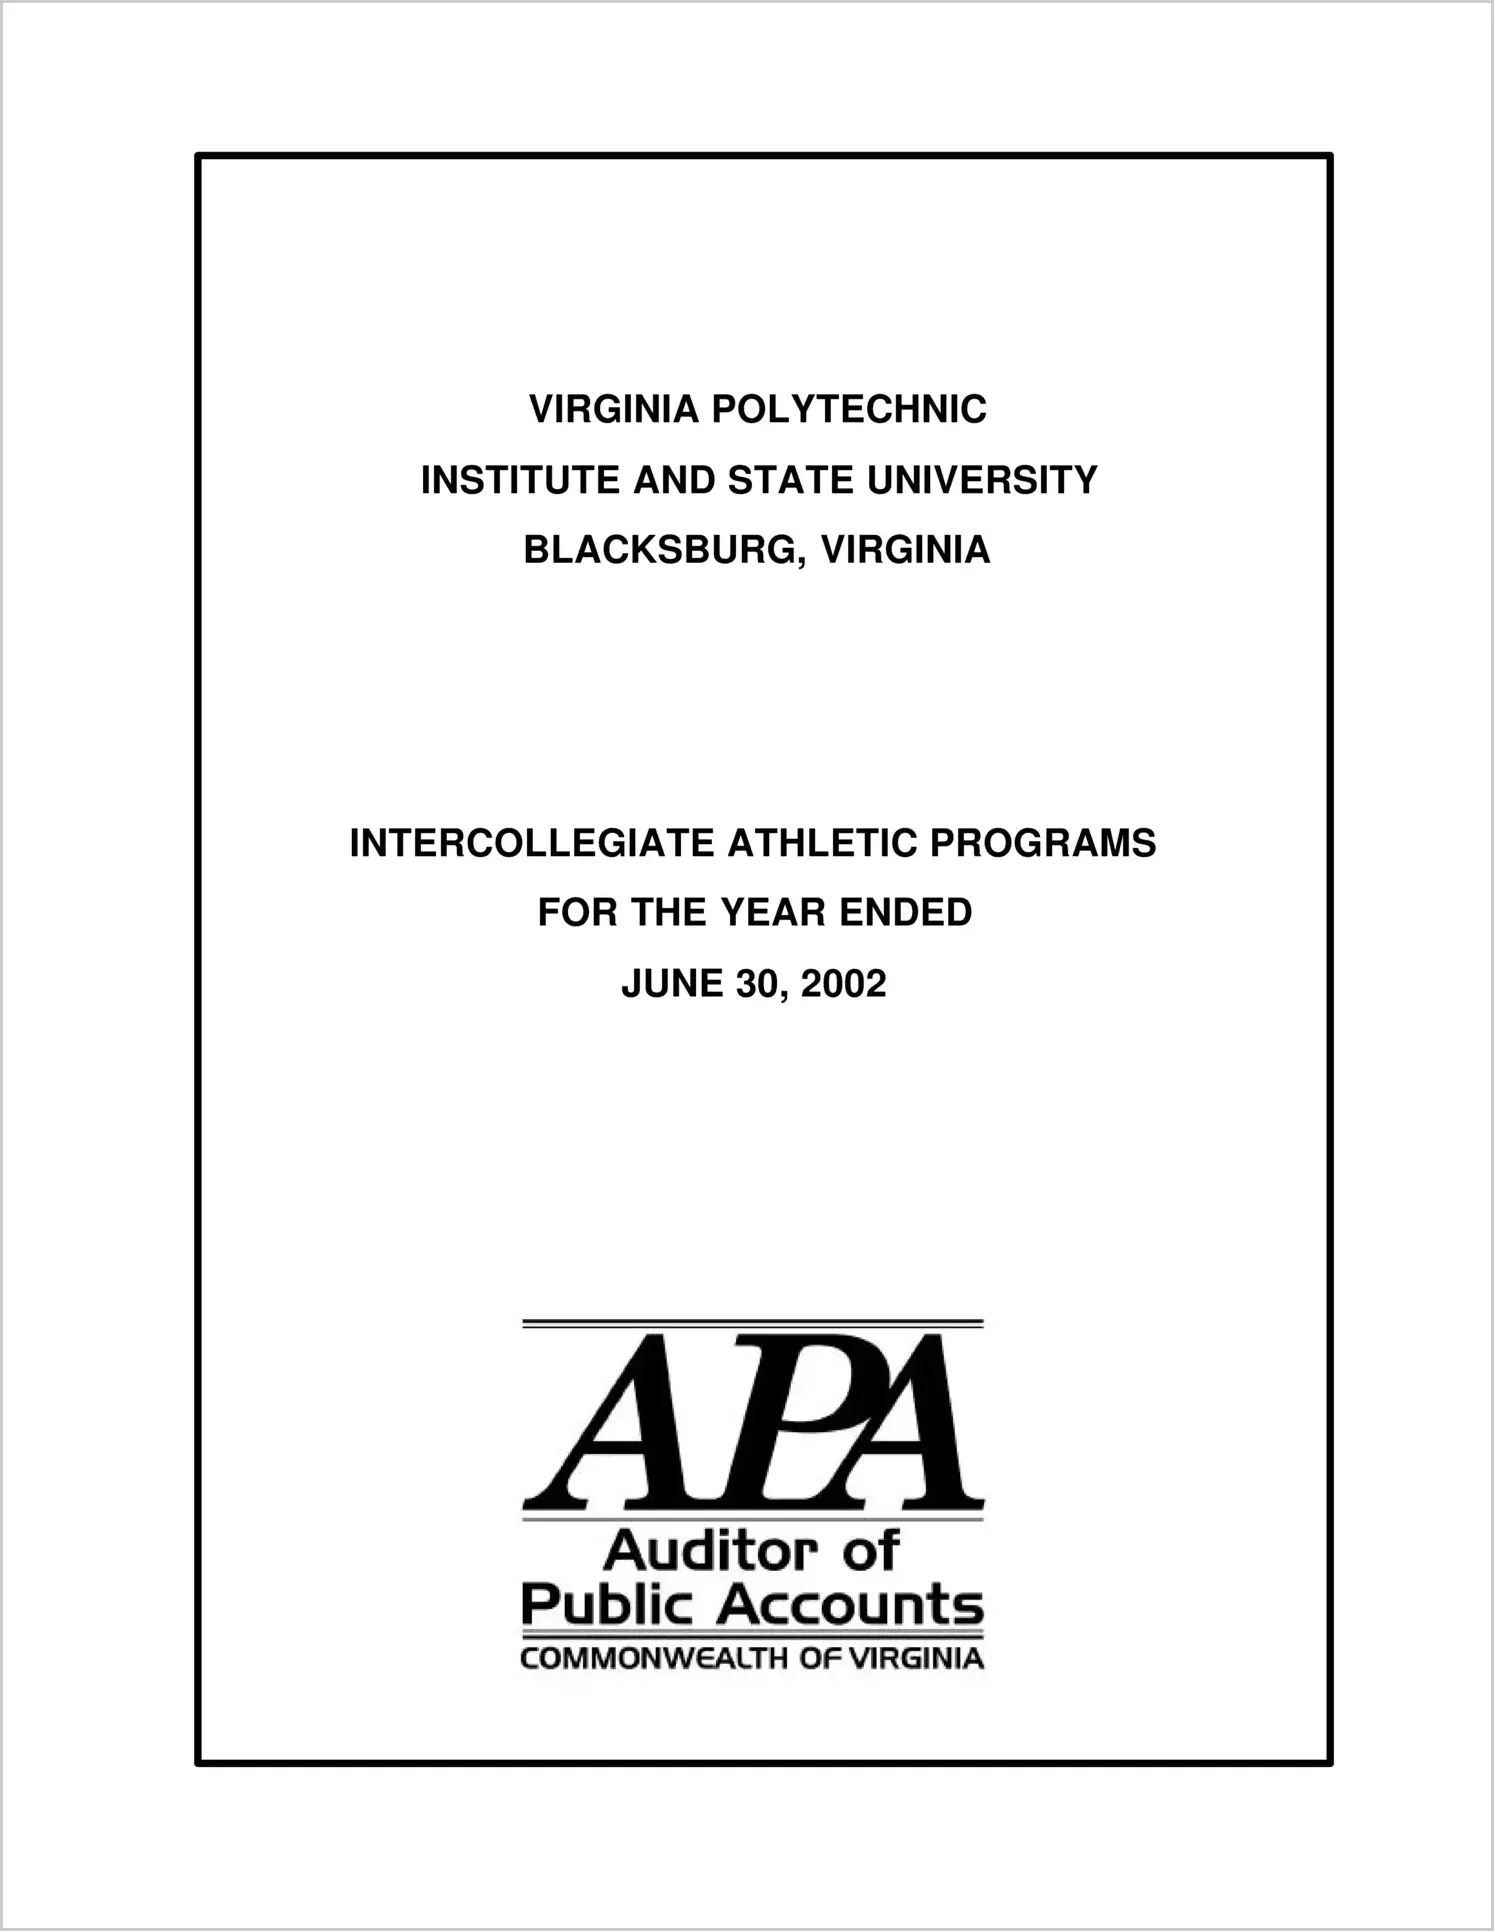 Virginia Polytechnic Institute and State University Intercollegiate Athletic Programs for the year ended June 30, 2002